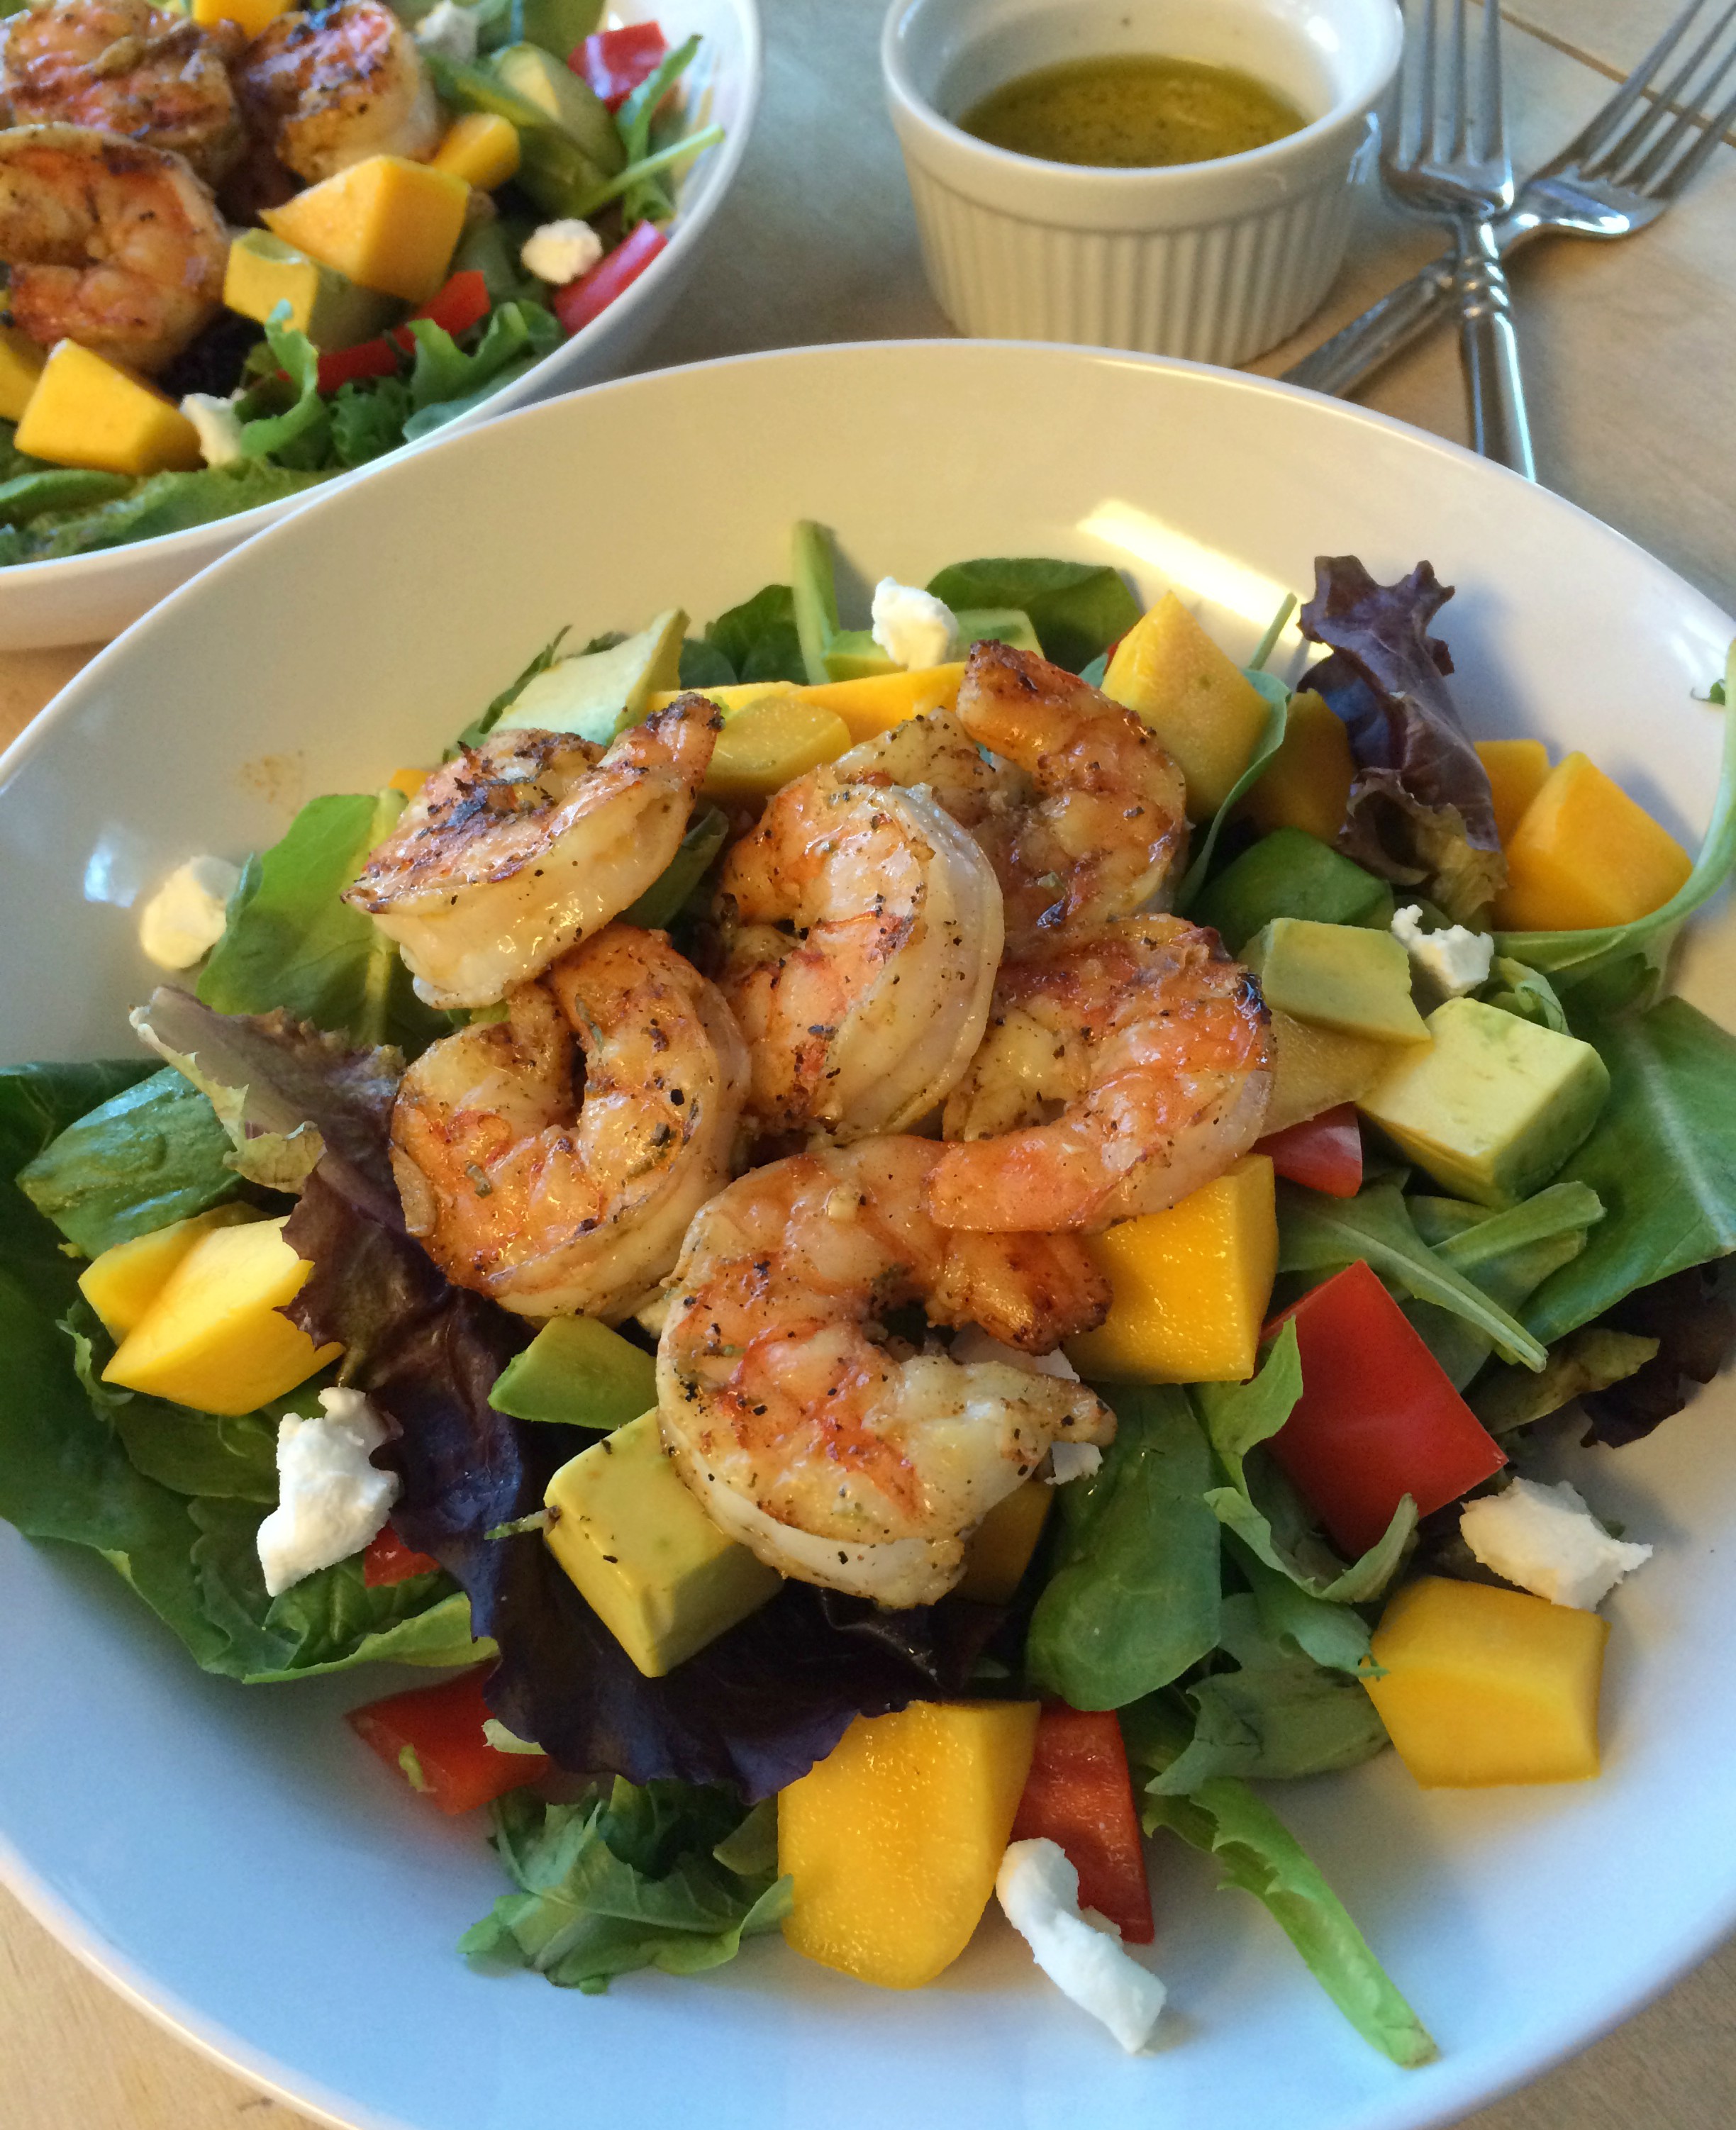 Grilled Chili Lime Shrimp, Mango, and Goat Cheese Salad